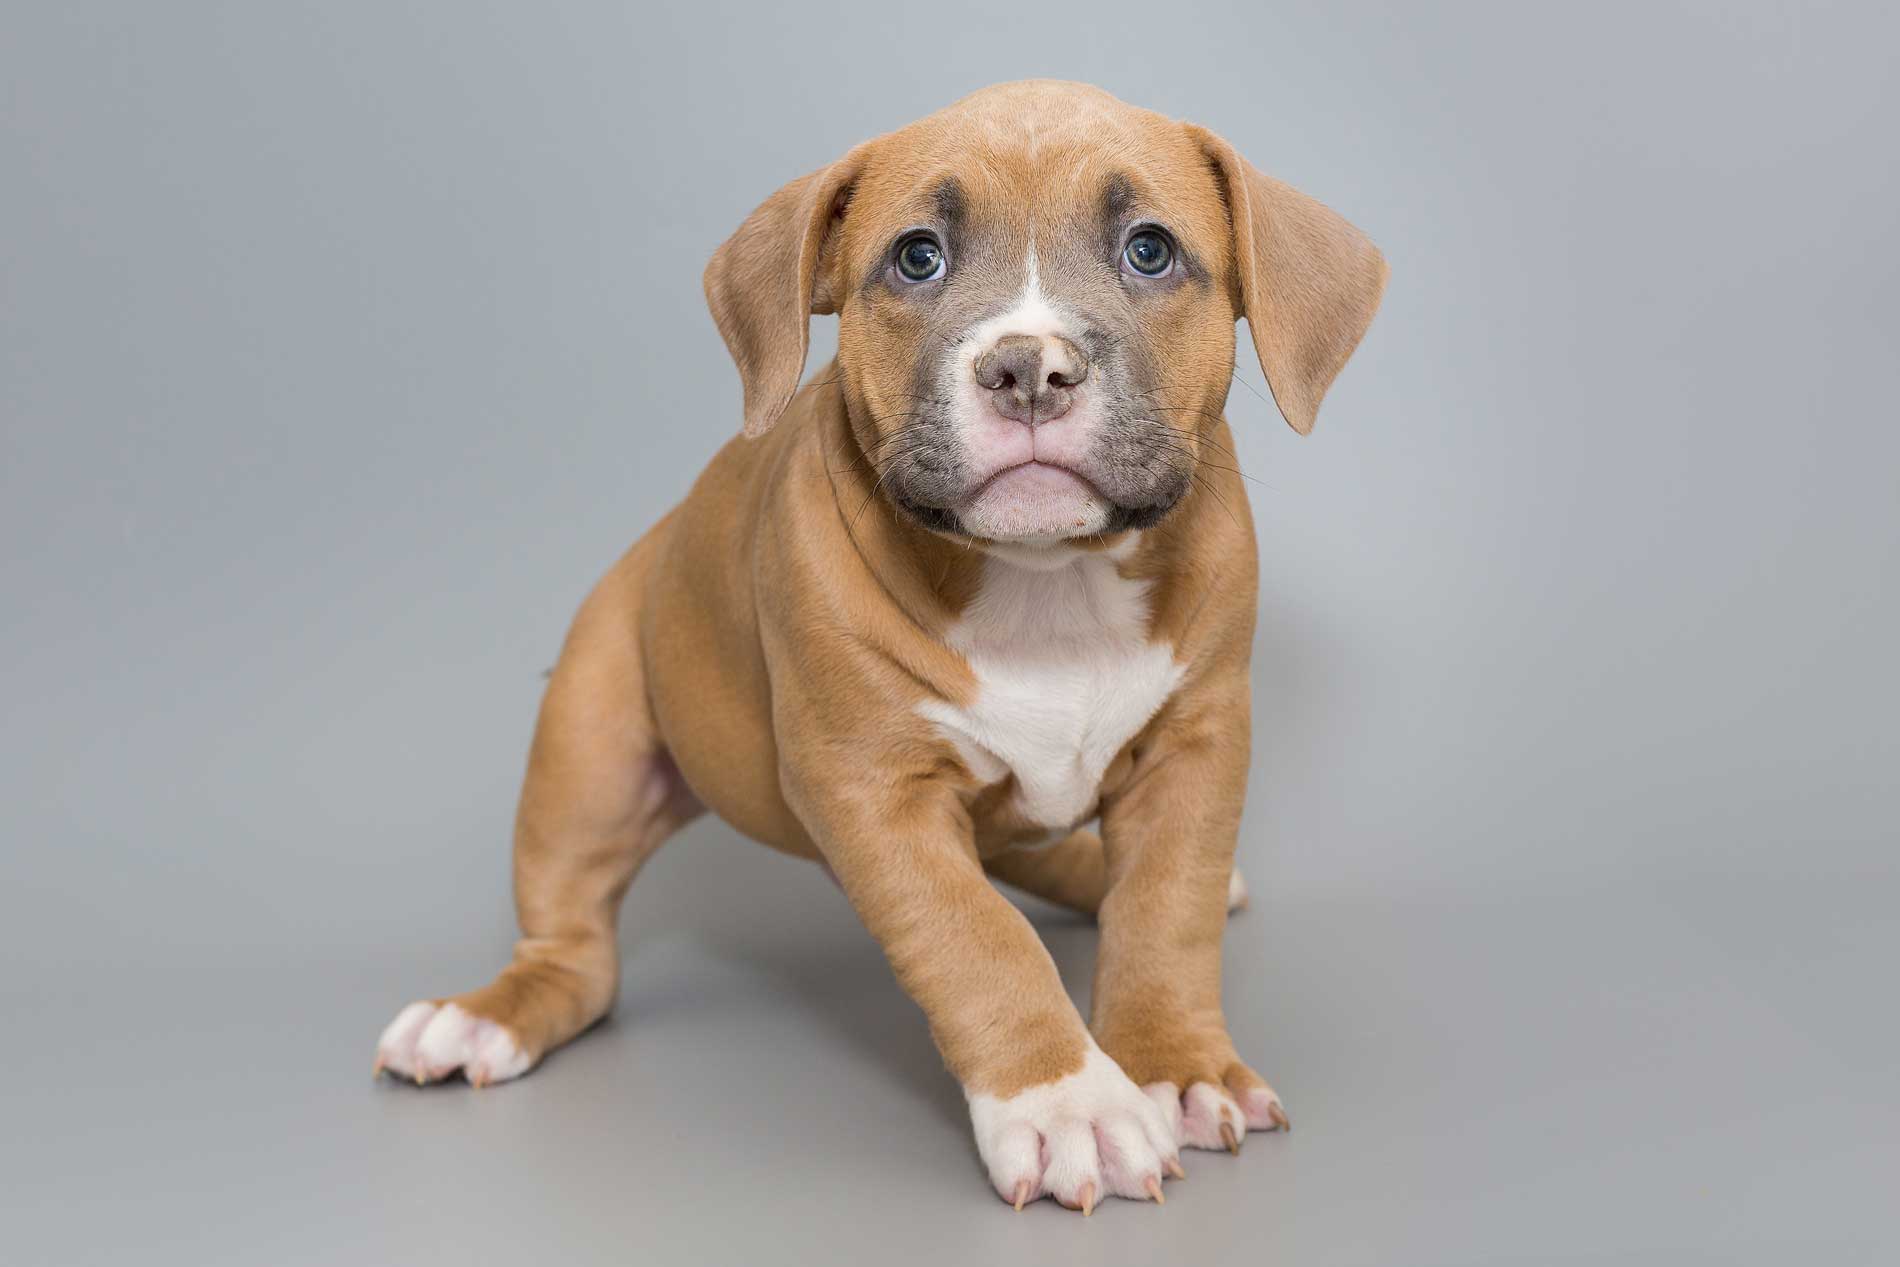 How to train your pitbull puppy